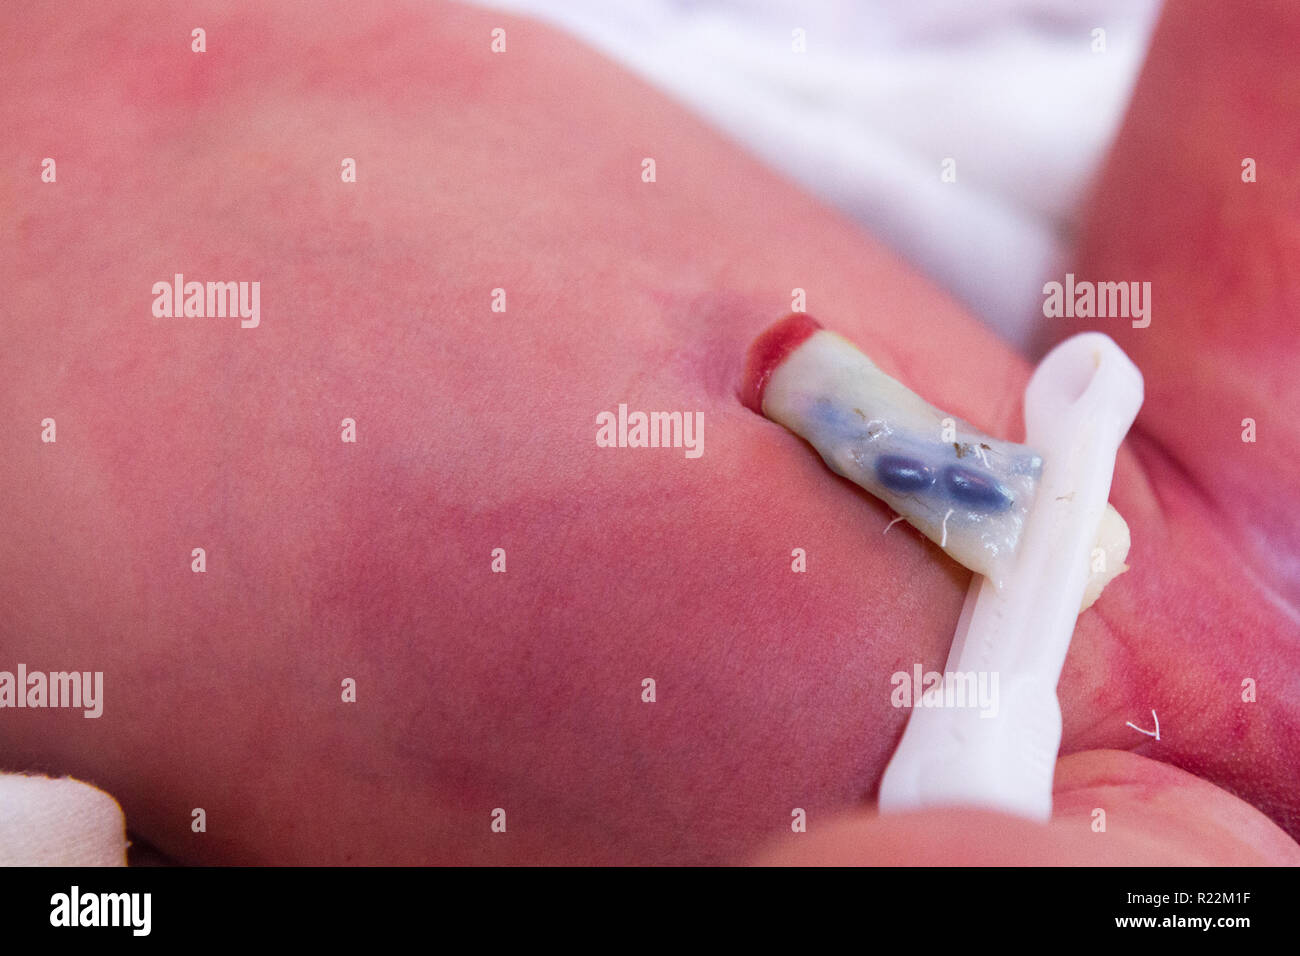 a clamped umbilical cord stump of a newborn baby Stock Photo